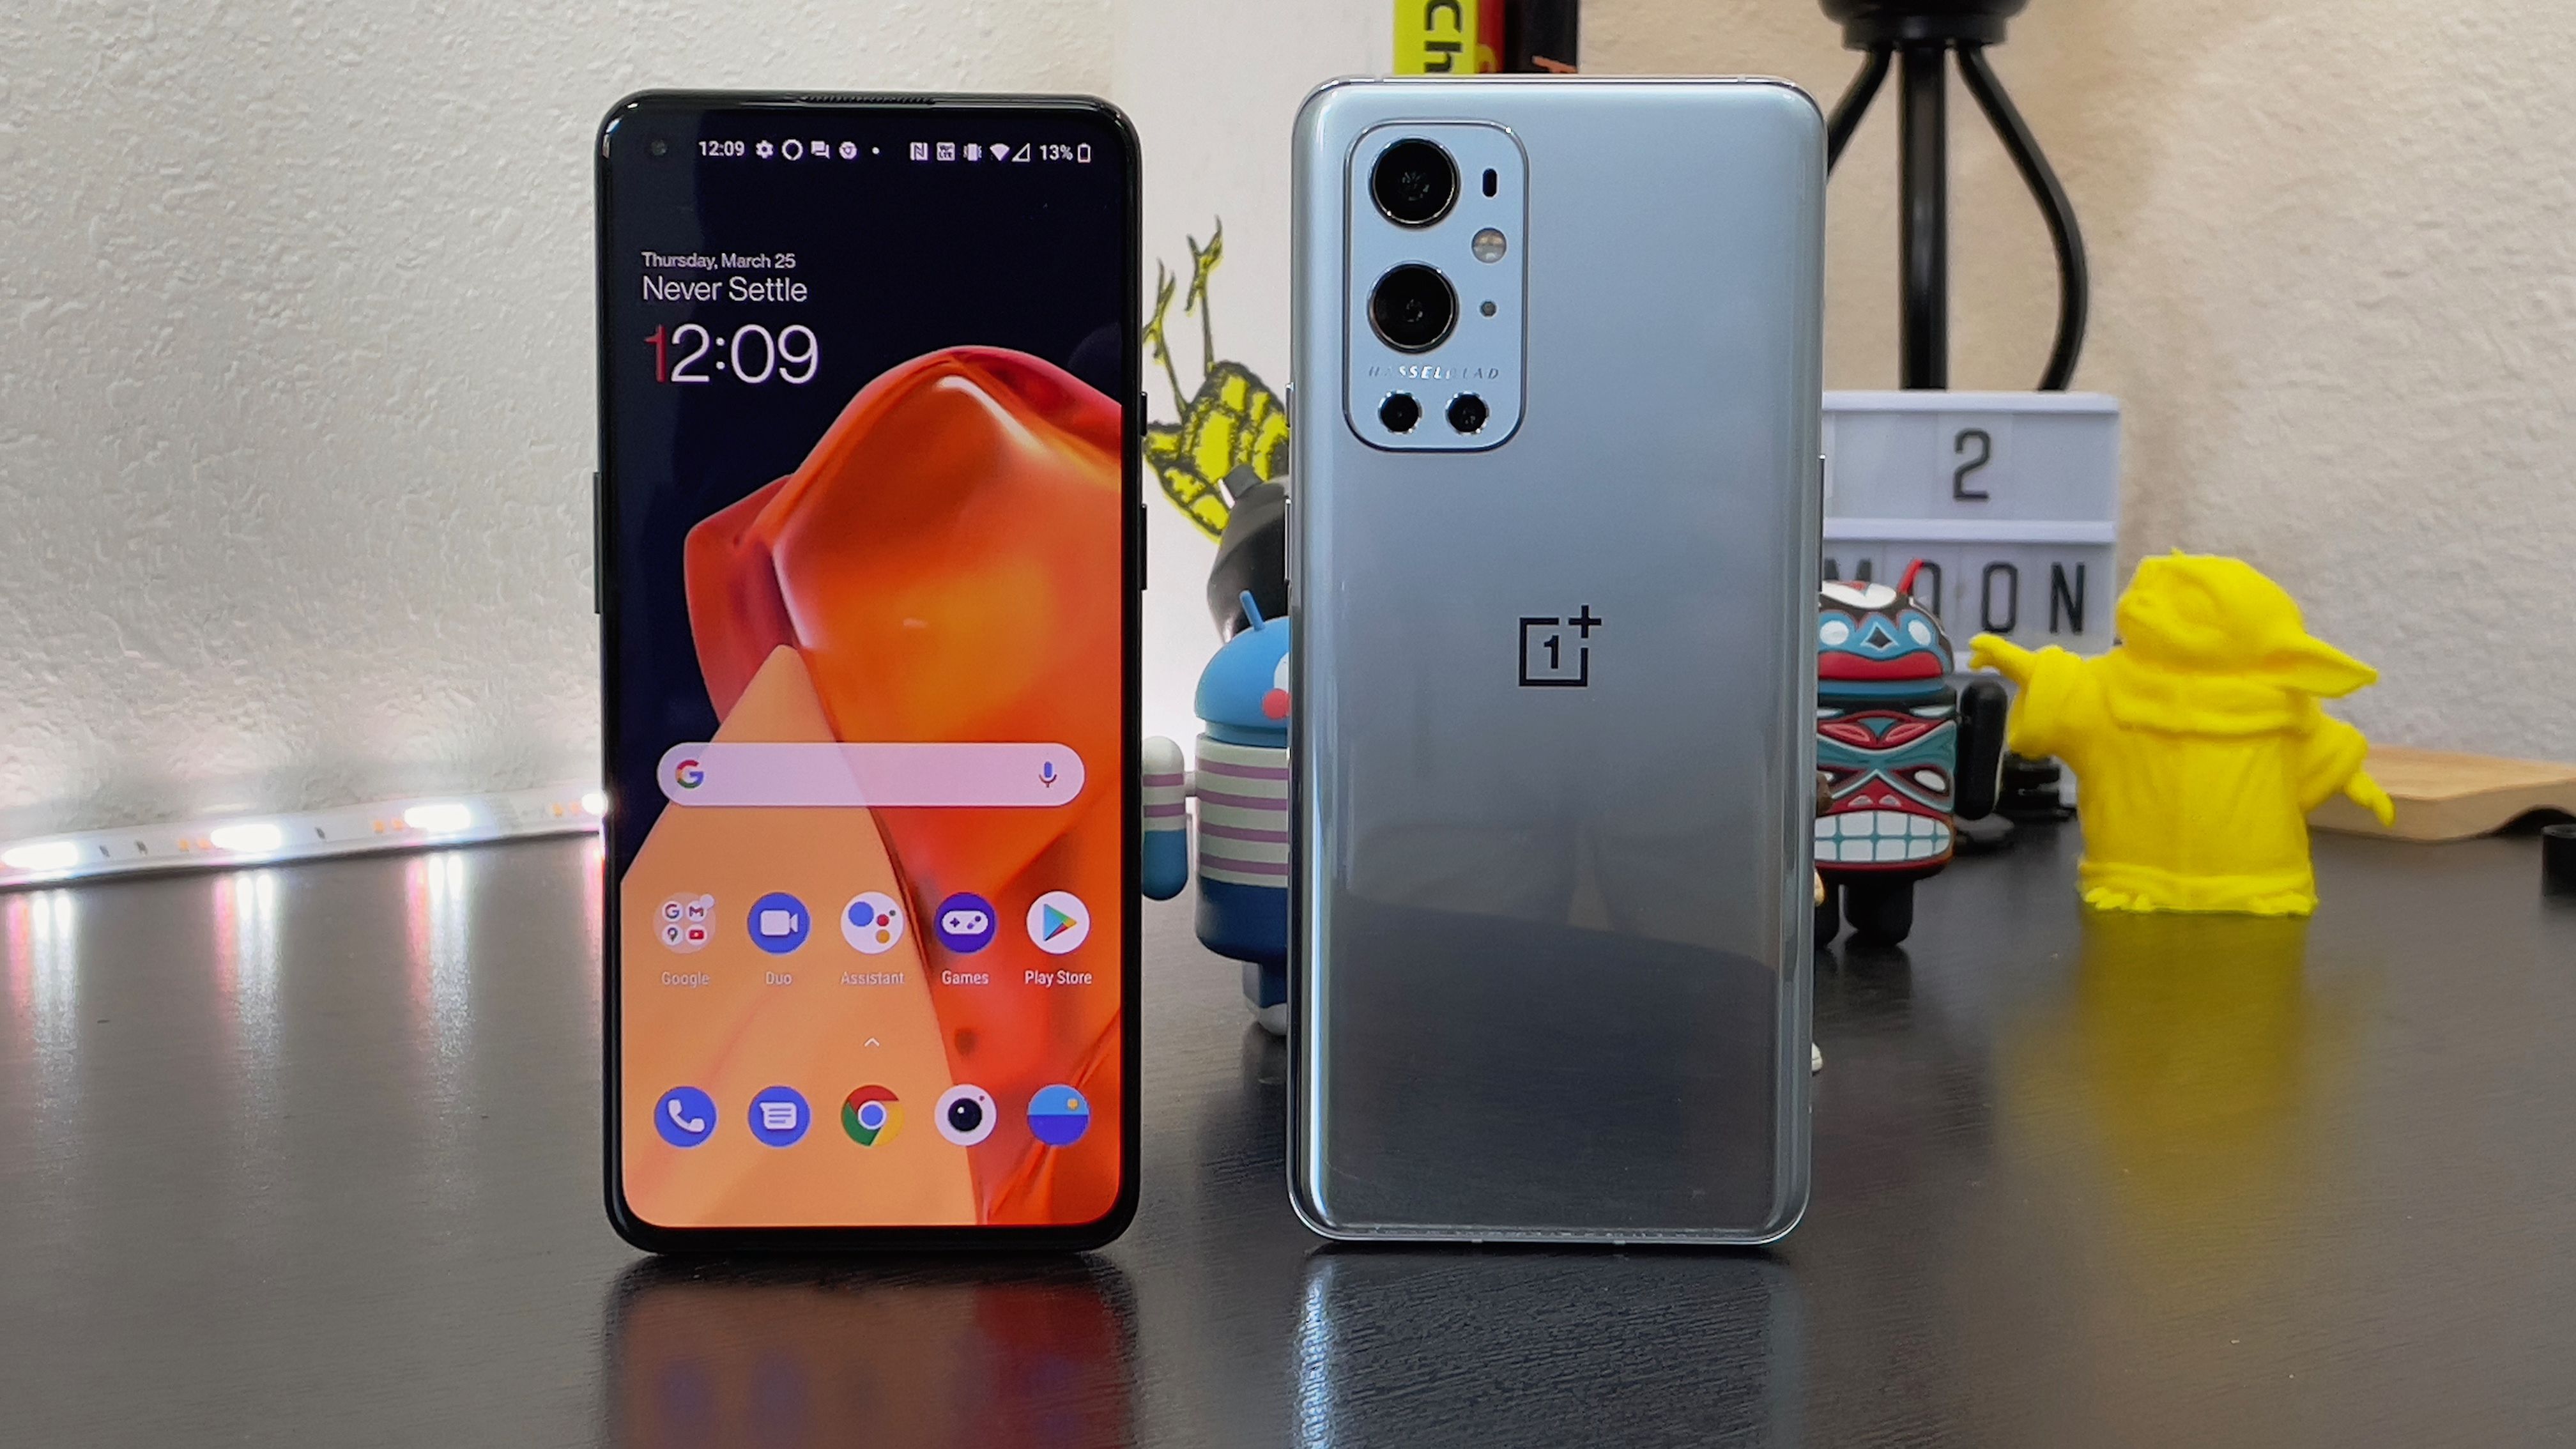 OnePlus 9 Pro review: the best Android alternative to Samsung - The Verge